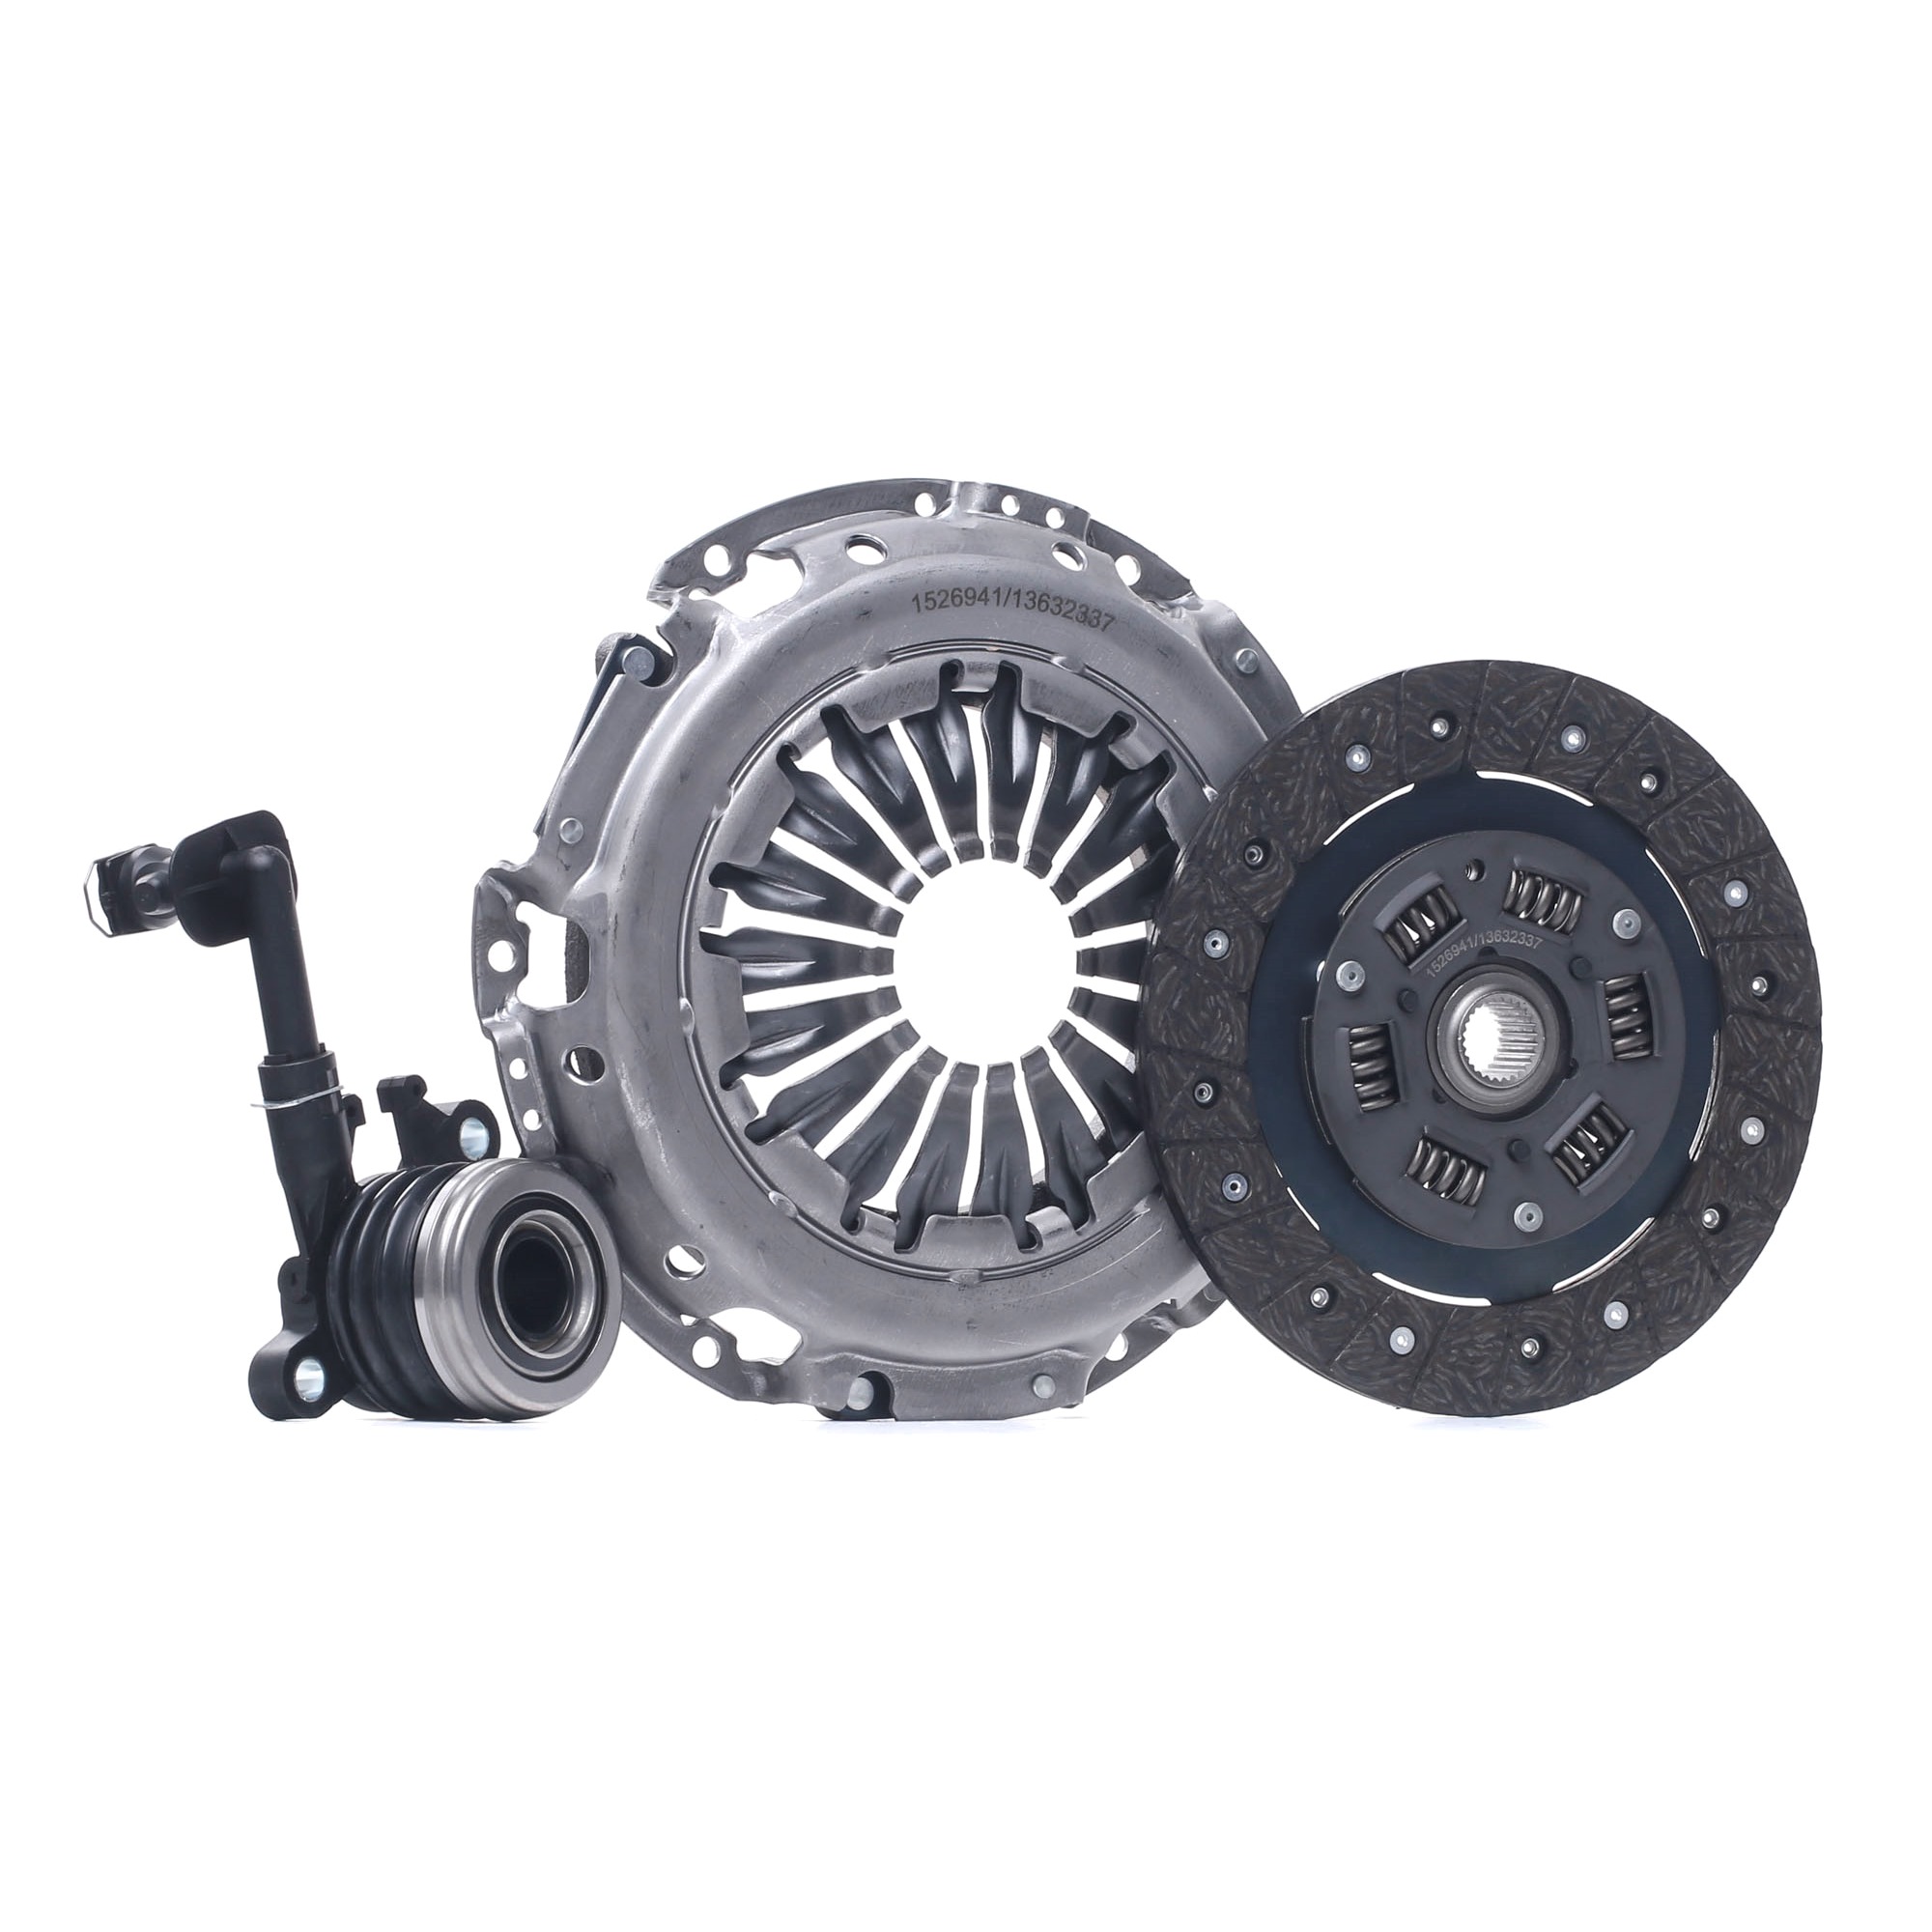 479C3297 RIDEX Clutch set DACIA with clutch pressure plate, with central slave cylinder, with clutch disc, 200mm